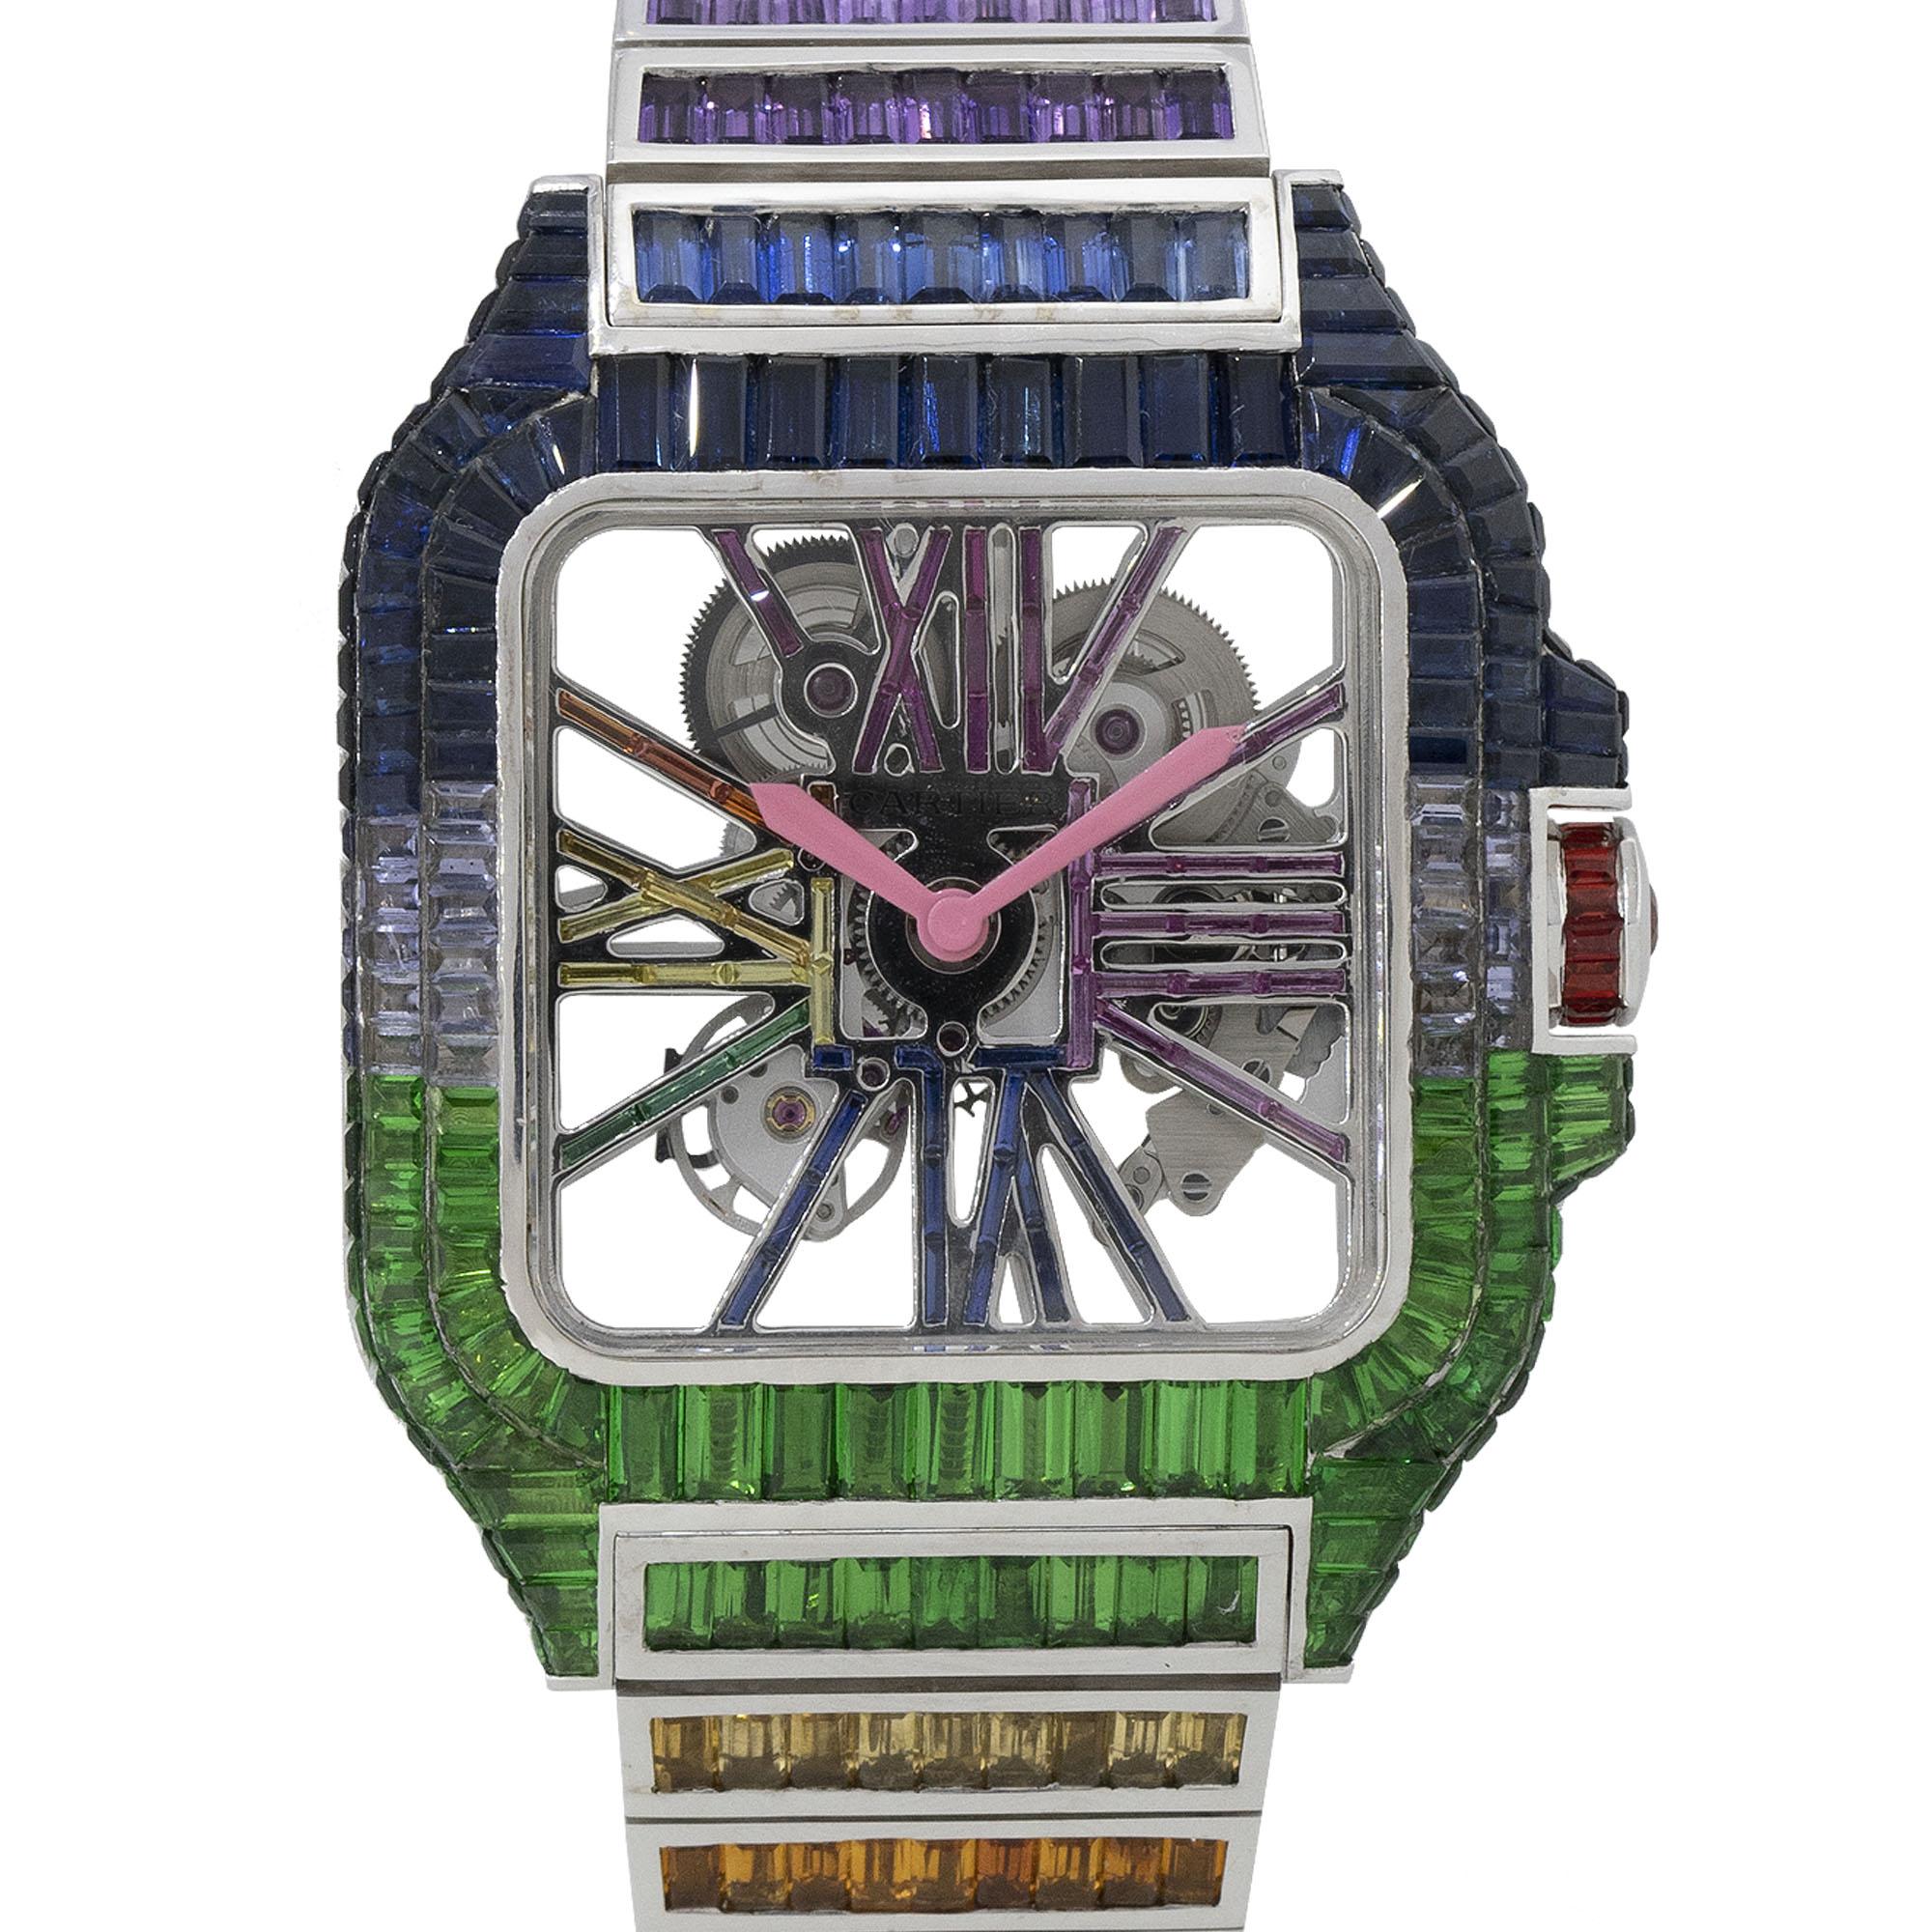 Brand: Cartier
Model: Santos
Case Material: 18k White Gold with aftermarket multicolor Sapphire gemstones
Case Diameter: 40mm
Crystal: Sapphire crystal
Bezel: 18k White Gold with aftermarket multicolor Sapphire gemstones
Dial: Skeleton Multi color